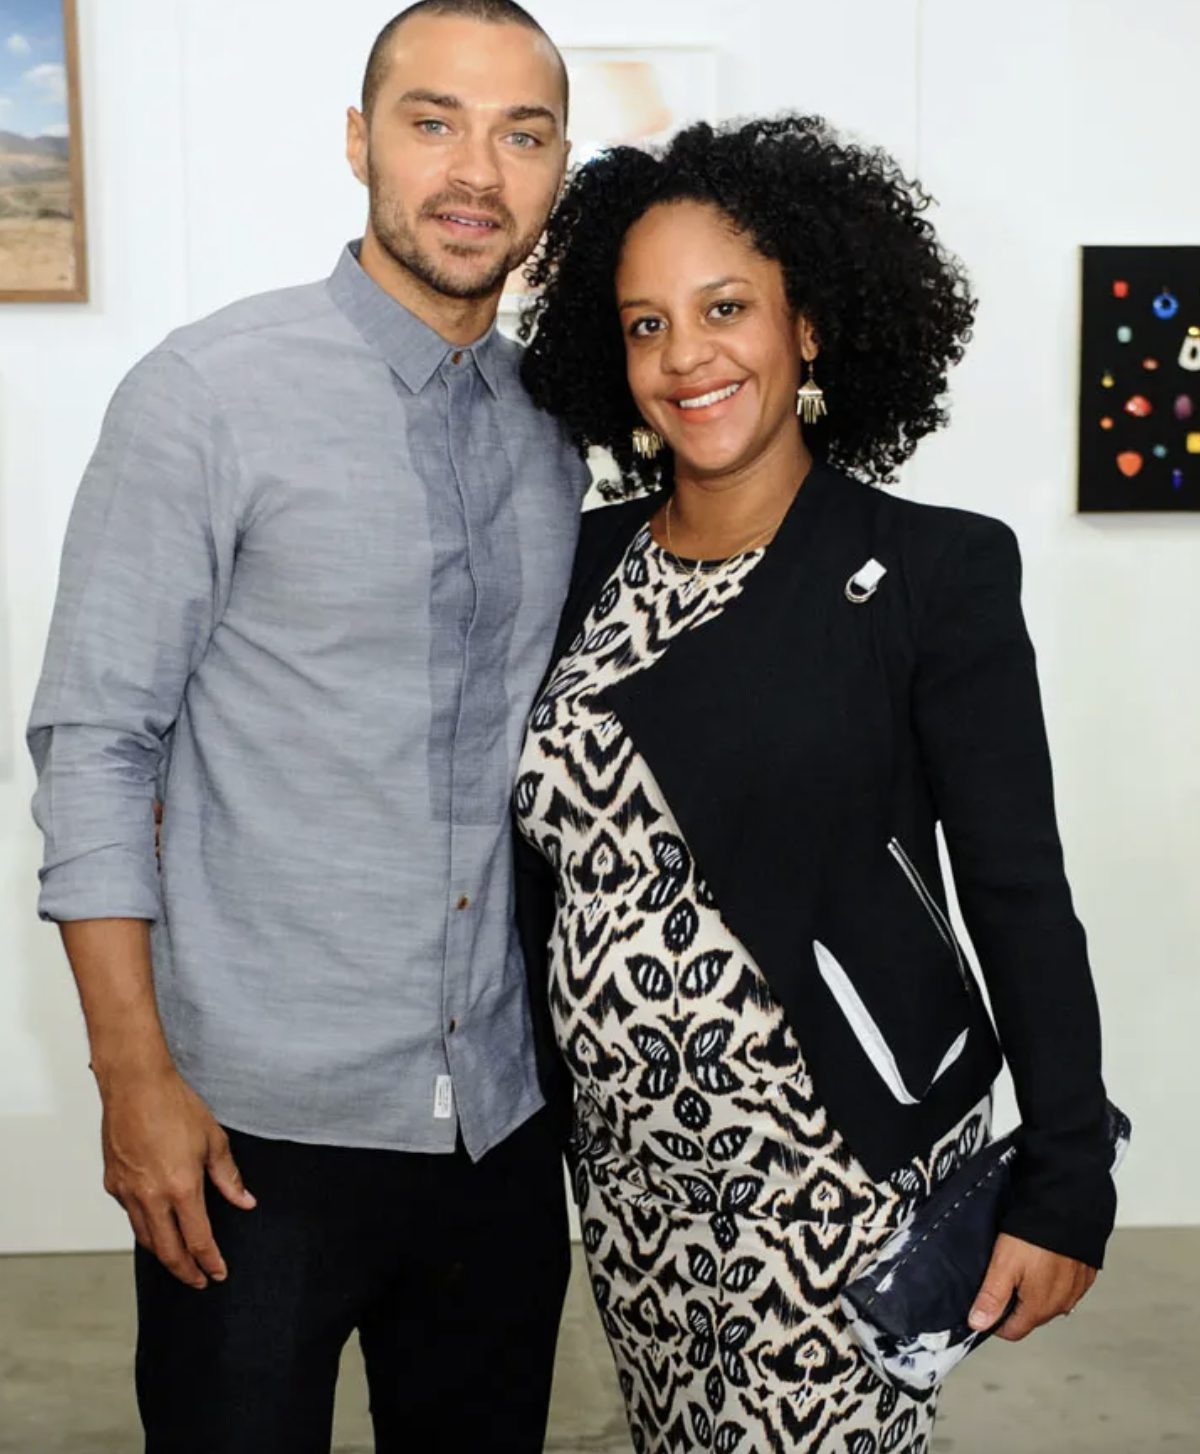 Jesse Williams was married to Aryn Drake-Lee for eight years, whom he met while working as a teacher.